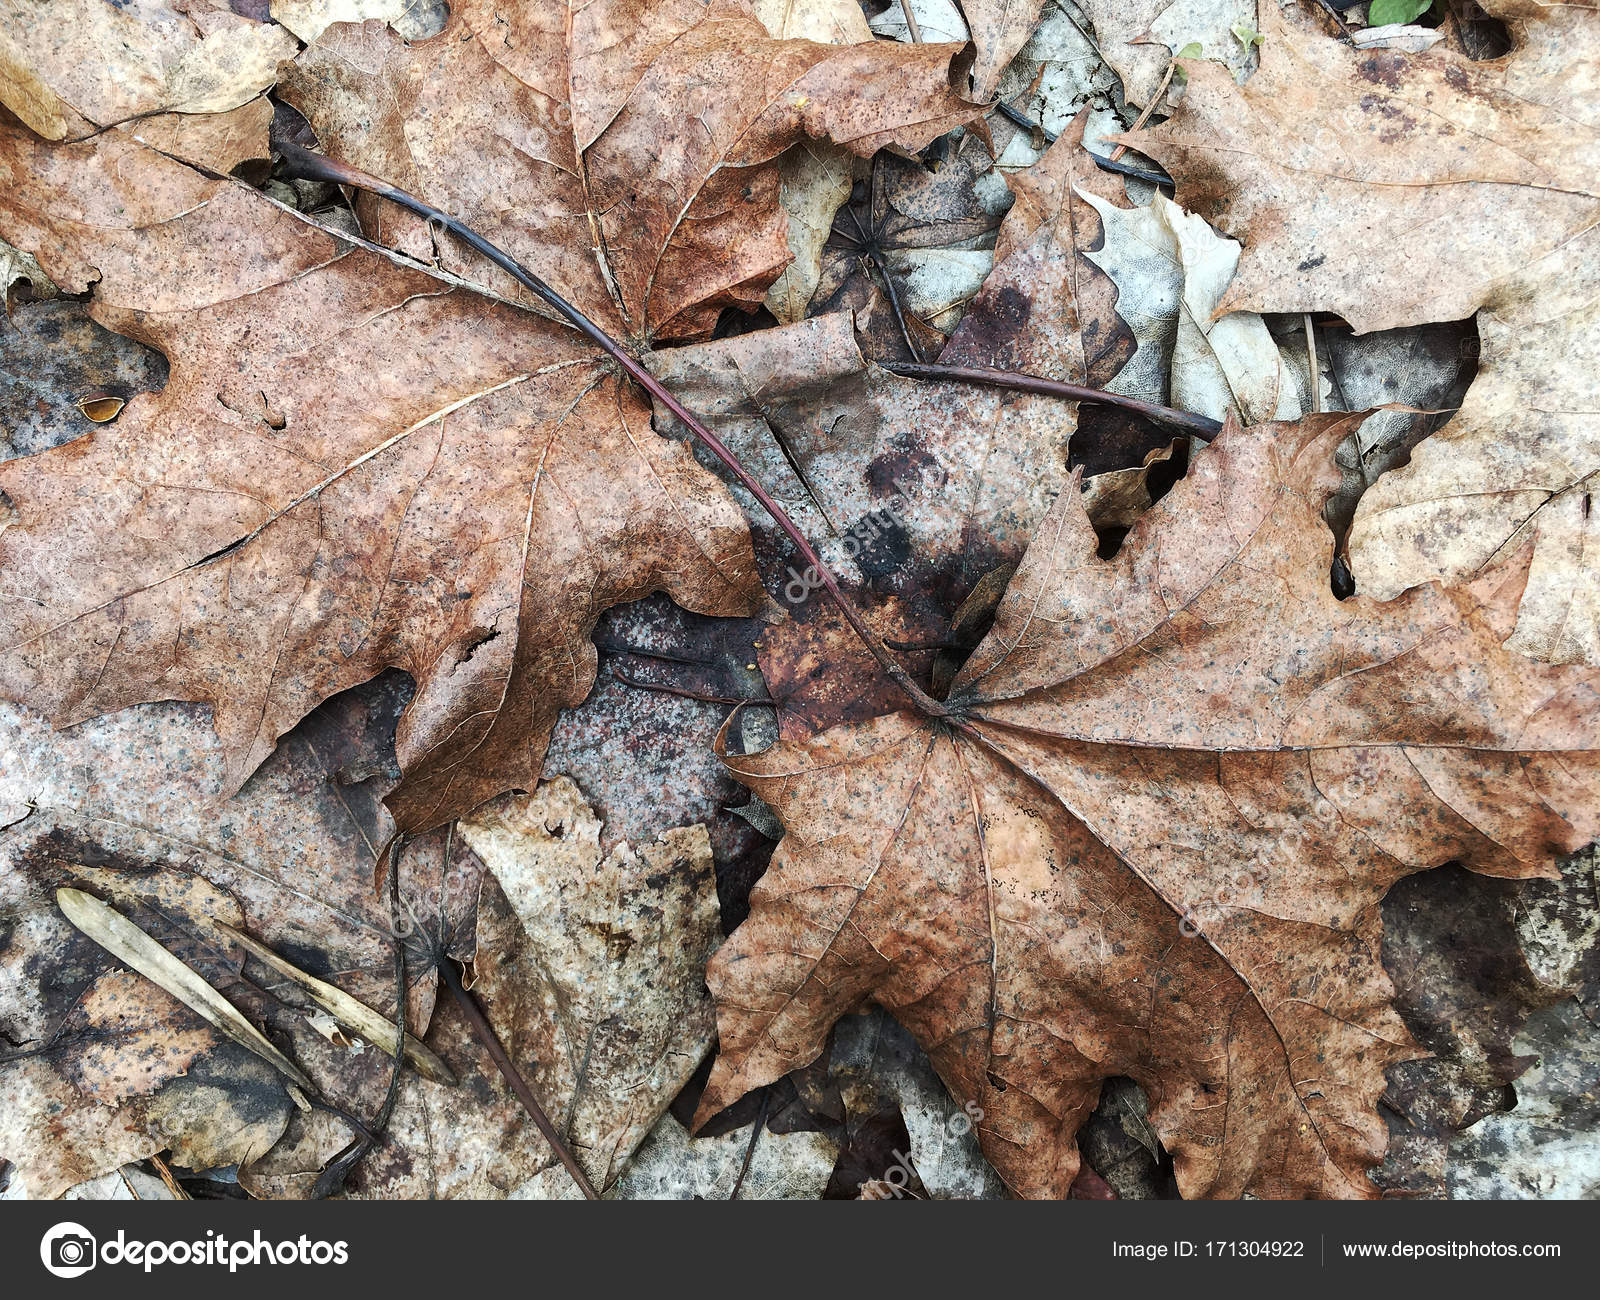 dry fallen leaves on the ground — Stock Photo © MrTwister #171304922